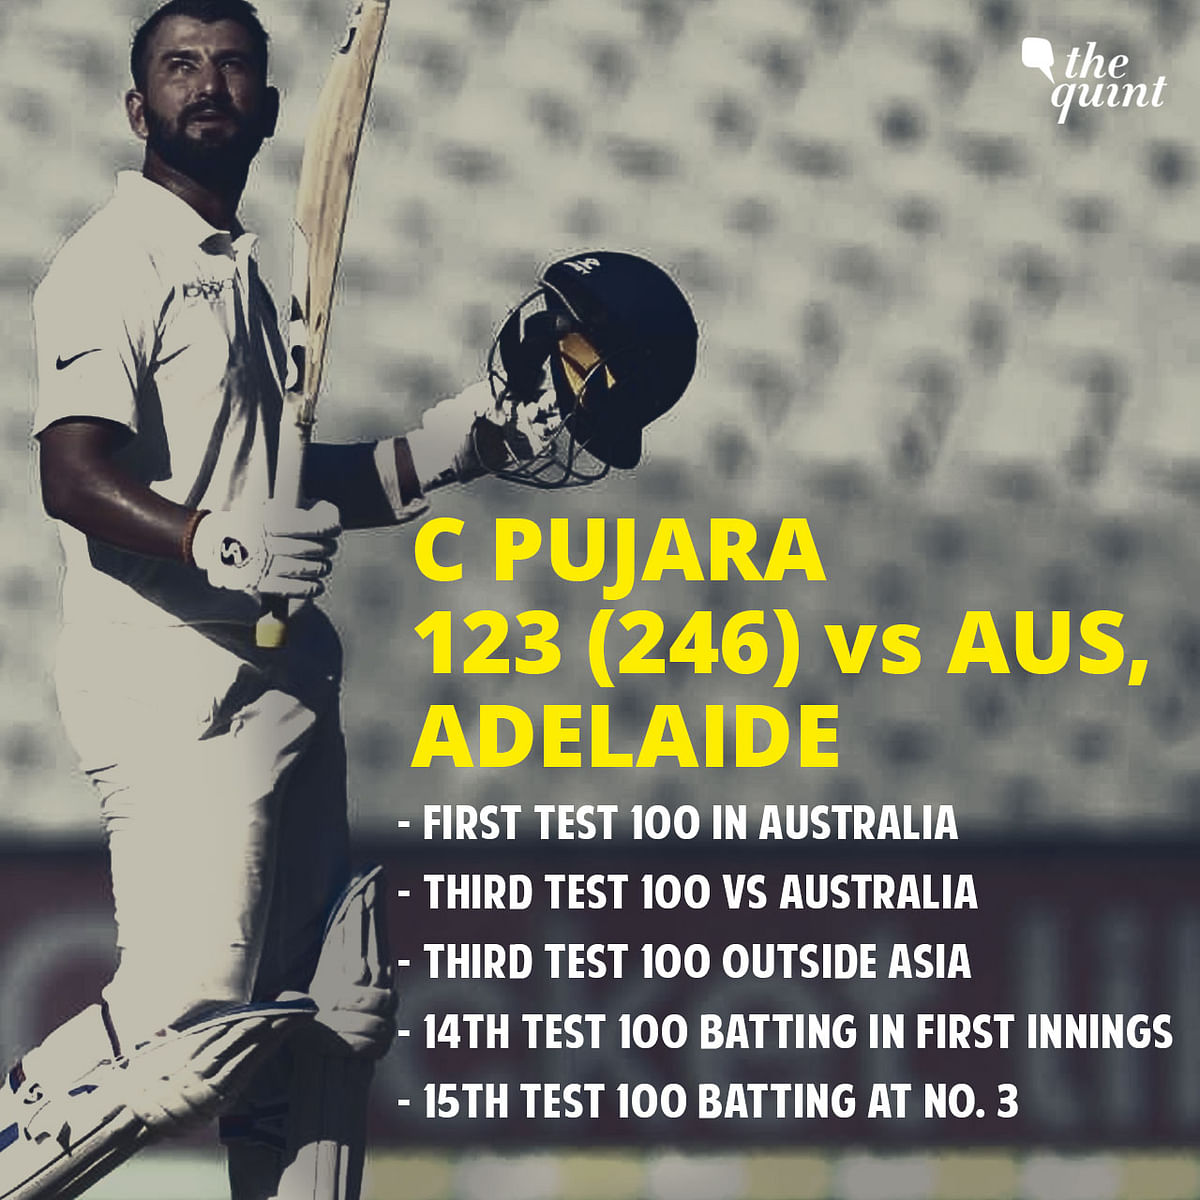 Statistical highlights from Day 1 of the Adelaide Test, with India 250/9 after opting to bat vs Australia.